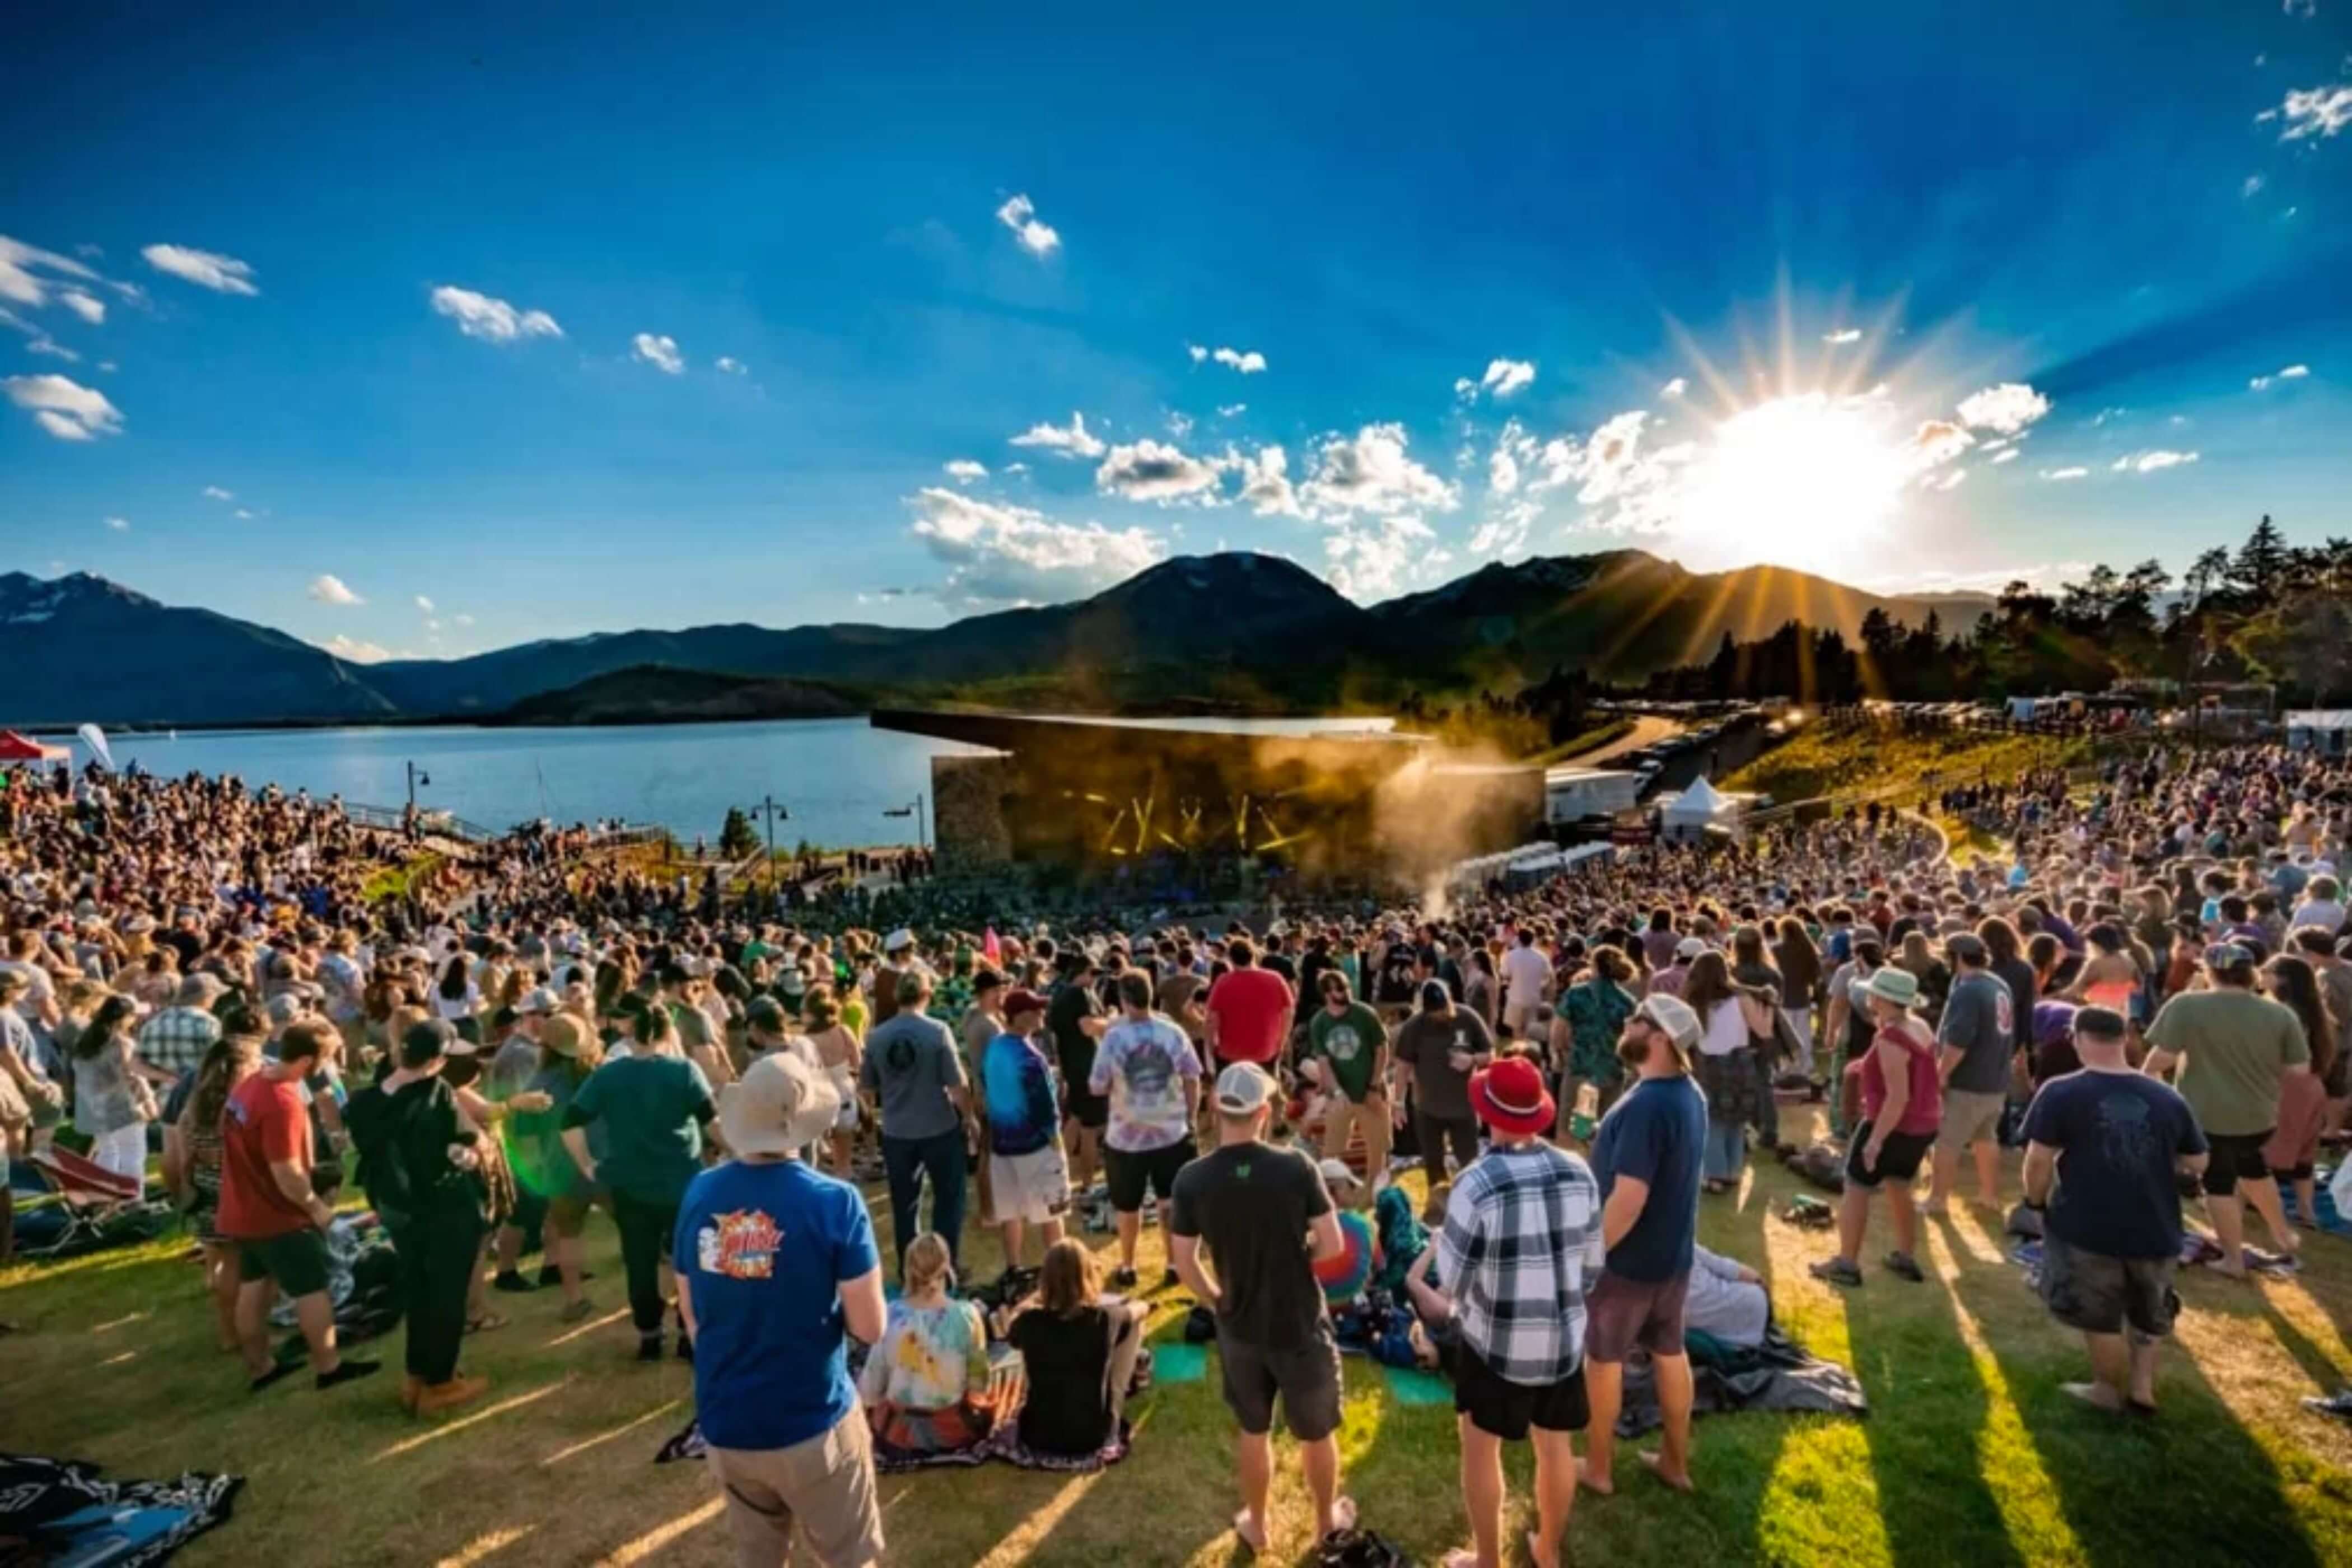 Lake Dillon Amphitheater with lots of concert attendees.